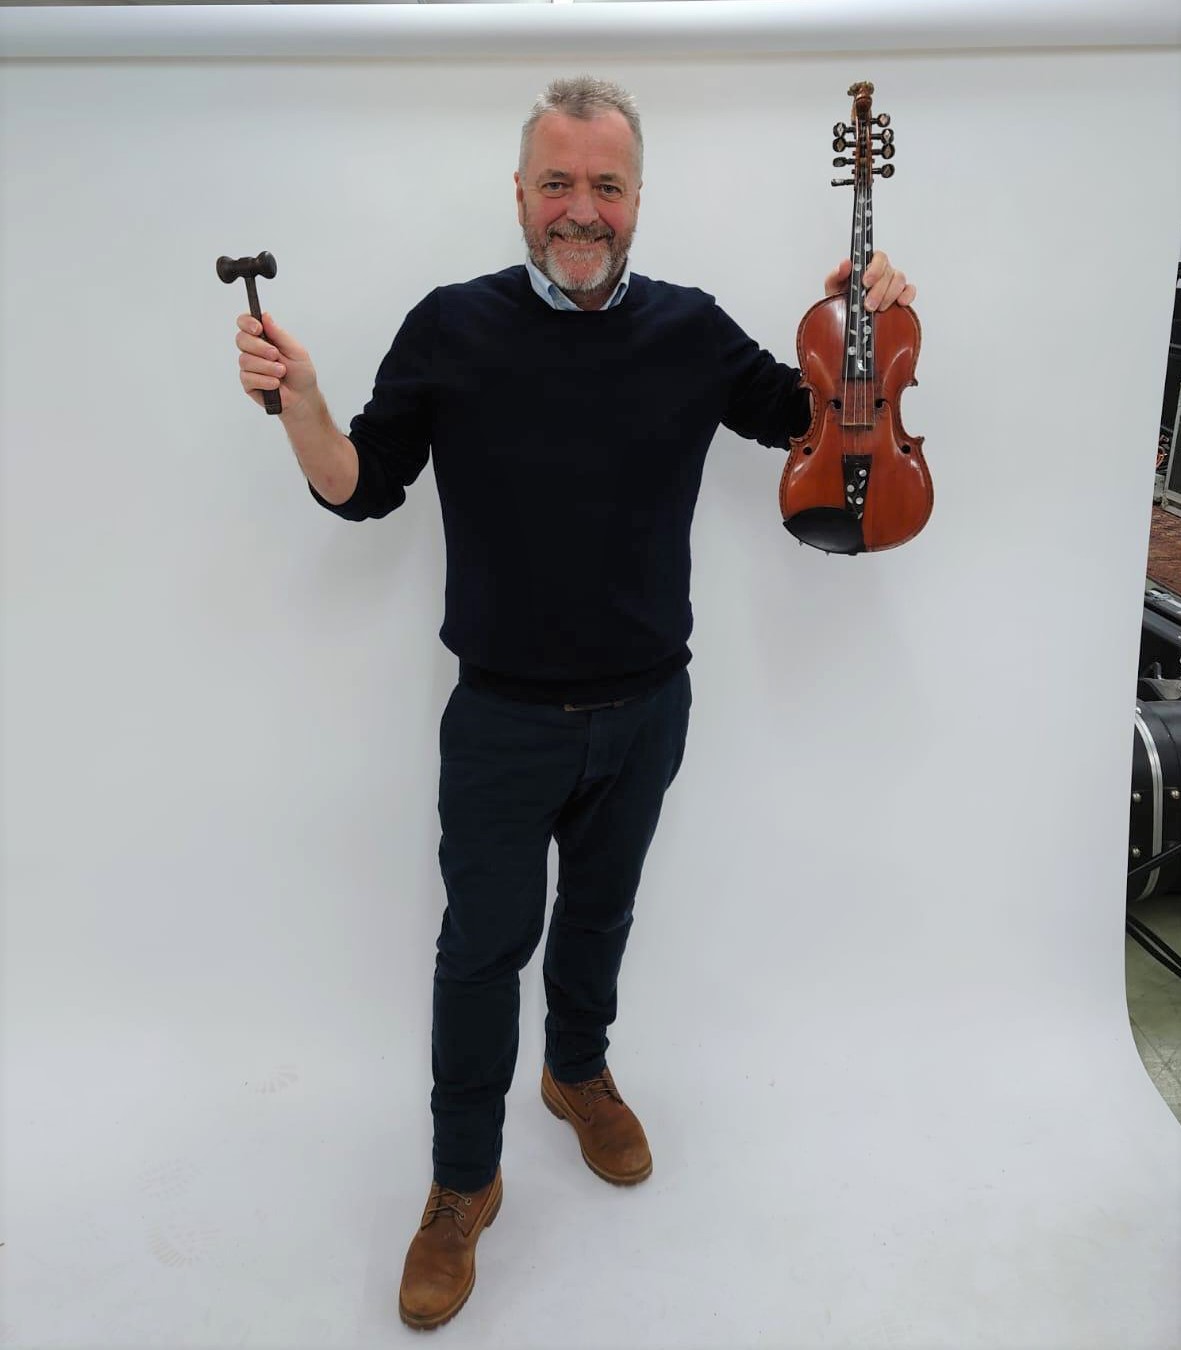 The Hardanger violin is expected to fetch between £3,000 and £6,000 when it is sold in December (Gardiner Houlgate/PA)